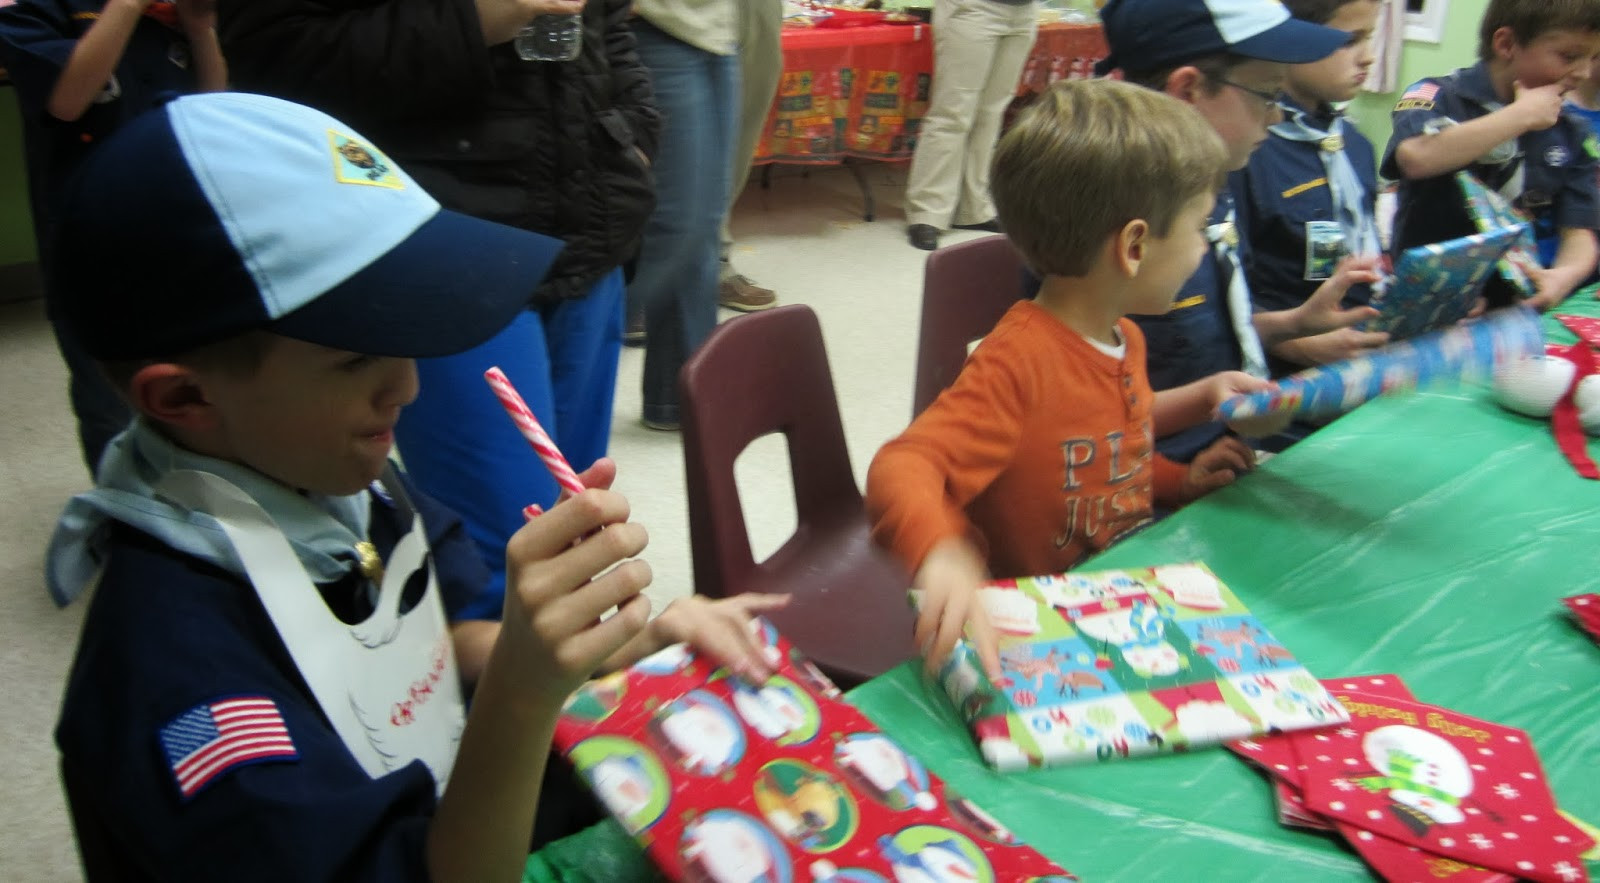 Cub Scout Christmas Party Ideas
 Sleepless in Babyland Cub Scout Den Christmas Party